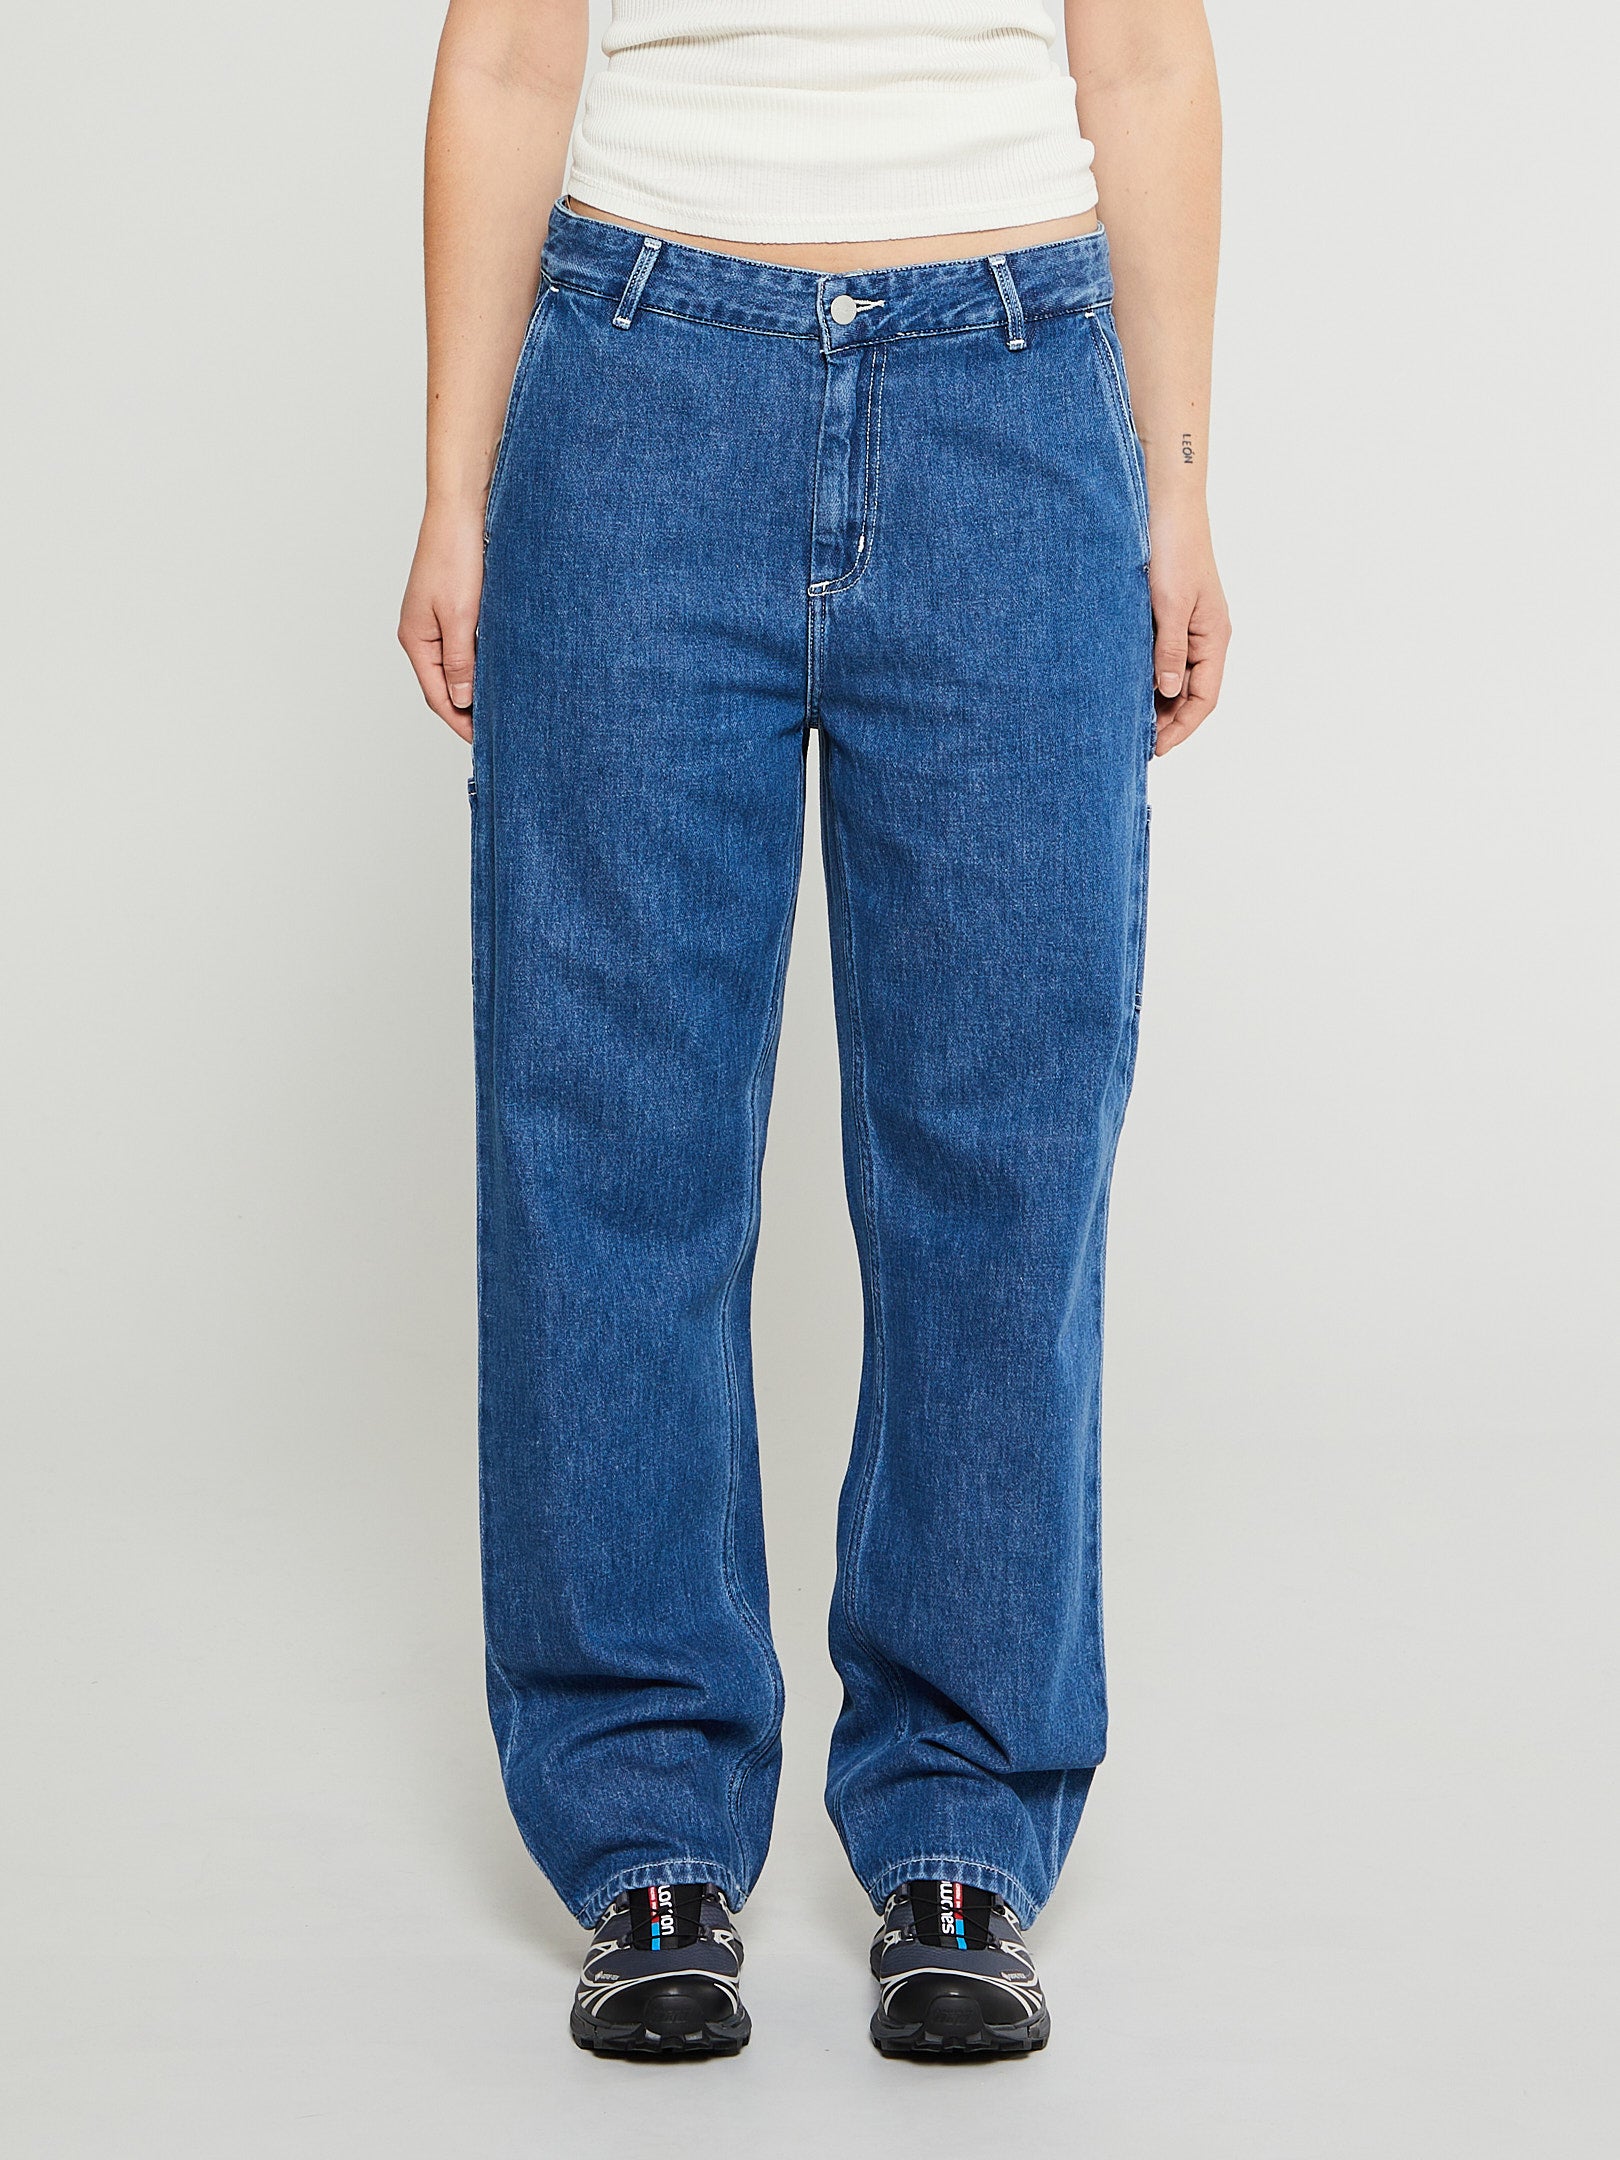 CARHARTT - W' Pierce Pant Straight in Blue Stone Washed